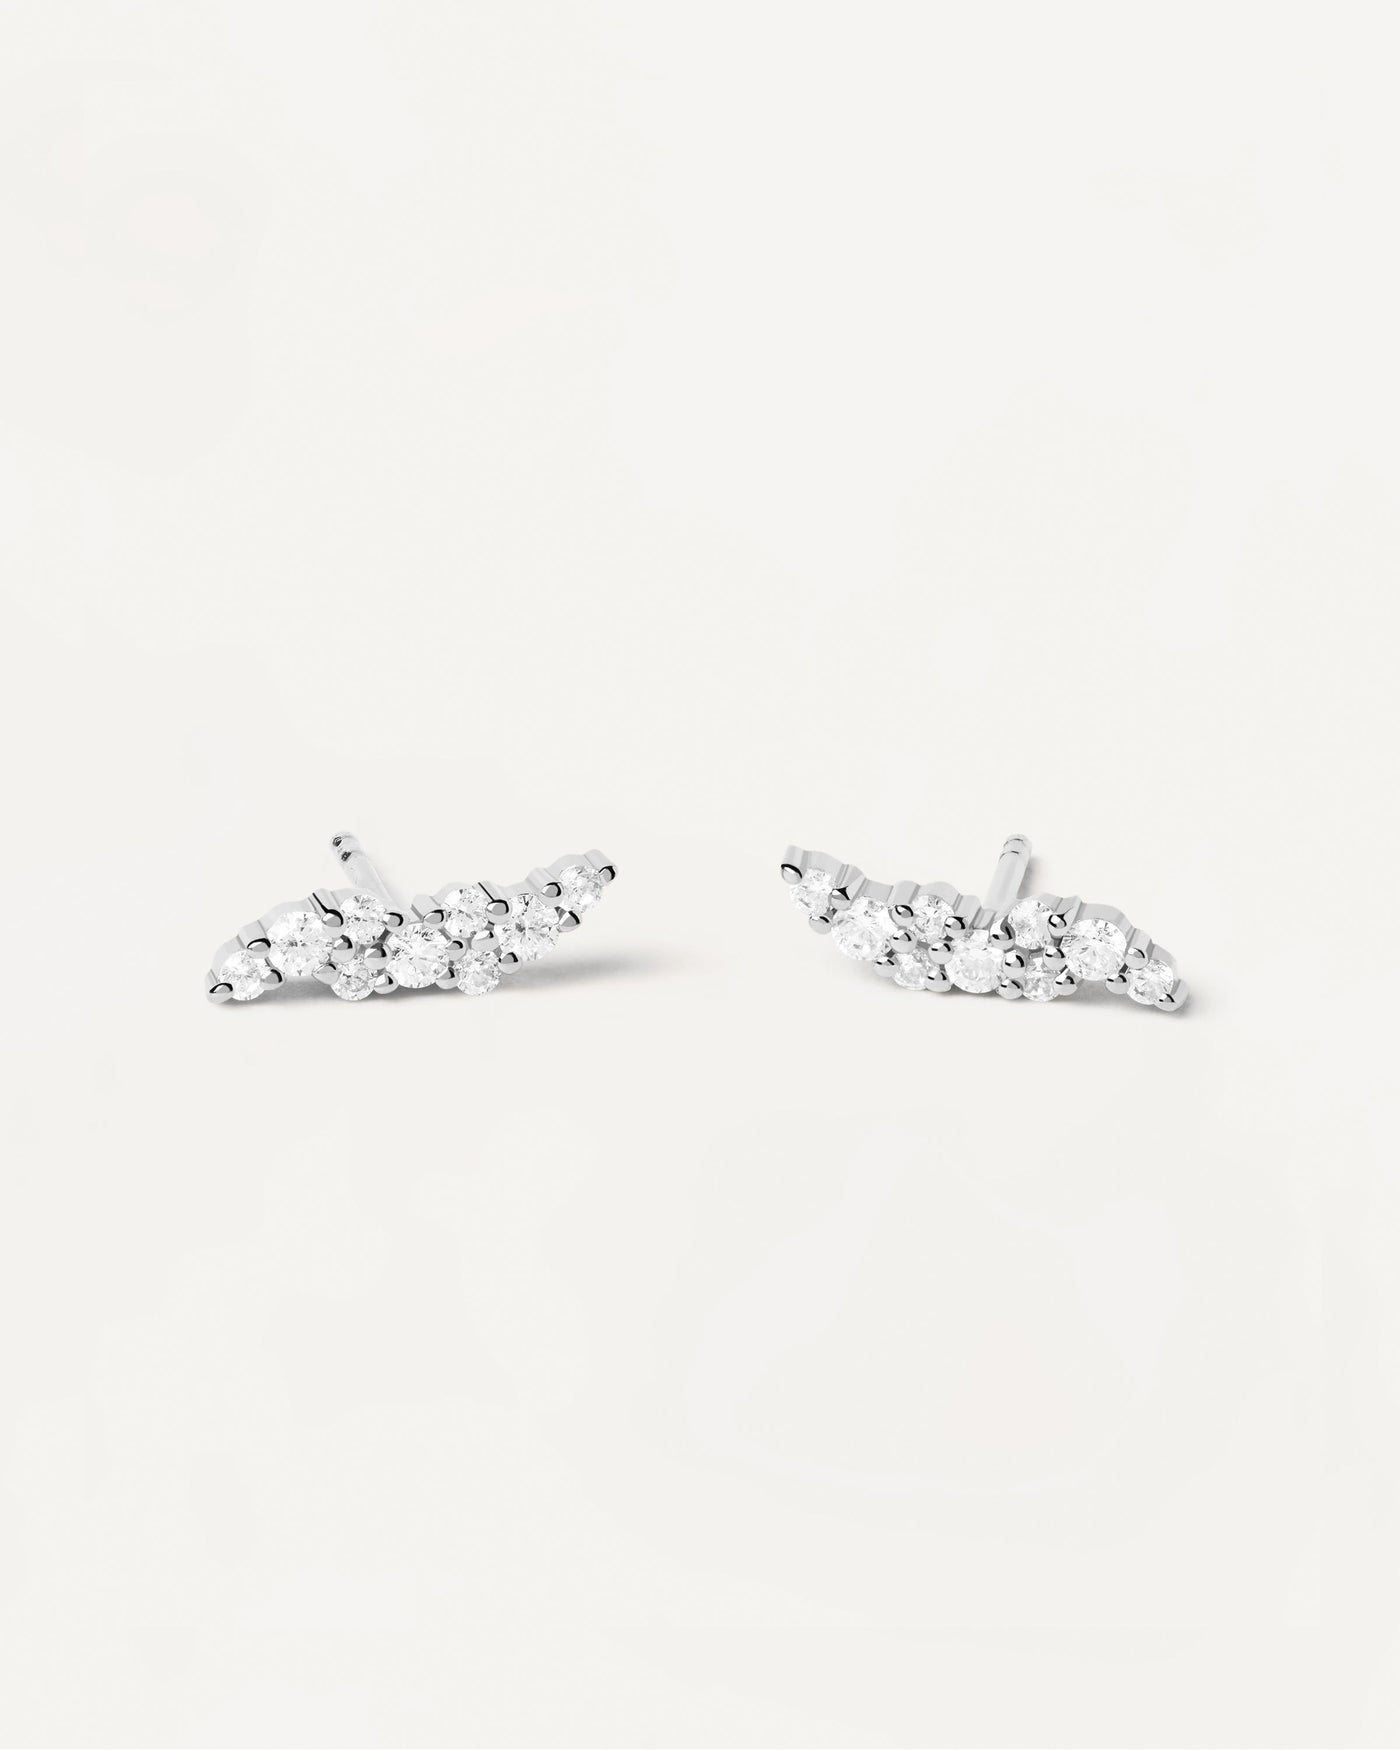 2023 Selection | Natura Silver Earrings. Basic sterling silver earrings with small white crystals. Get the latest arrival from PDPAOLA. Place your order safely and get this Best Seller. Free Shipping.